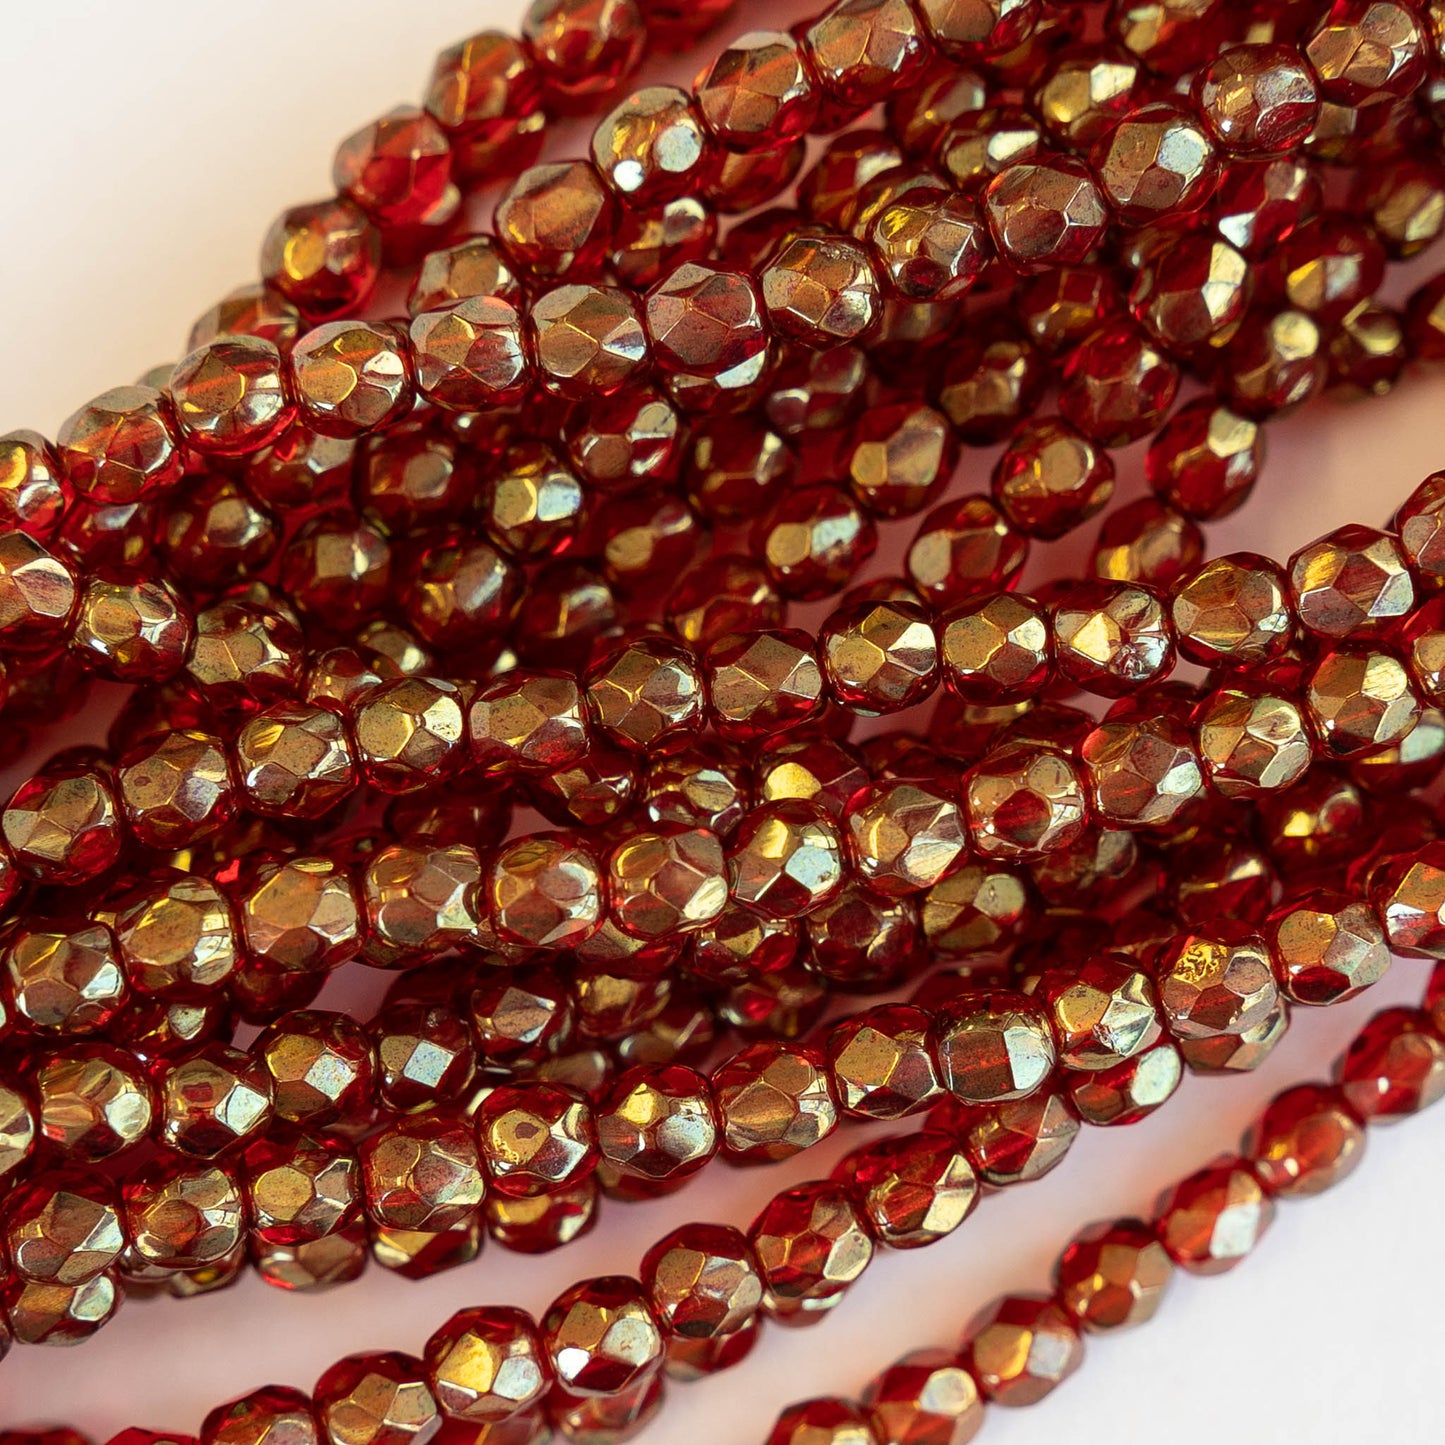 4mm Round Firepolished Beads - Red Gold Luster - 50 Beads